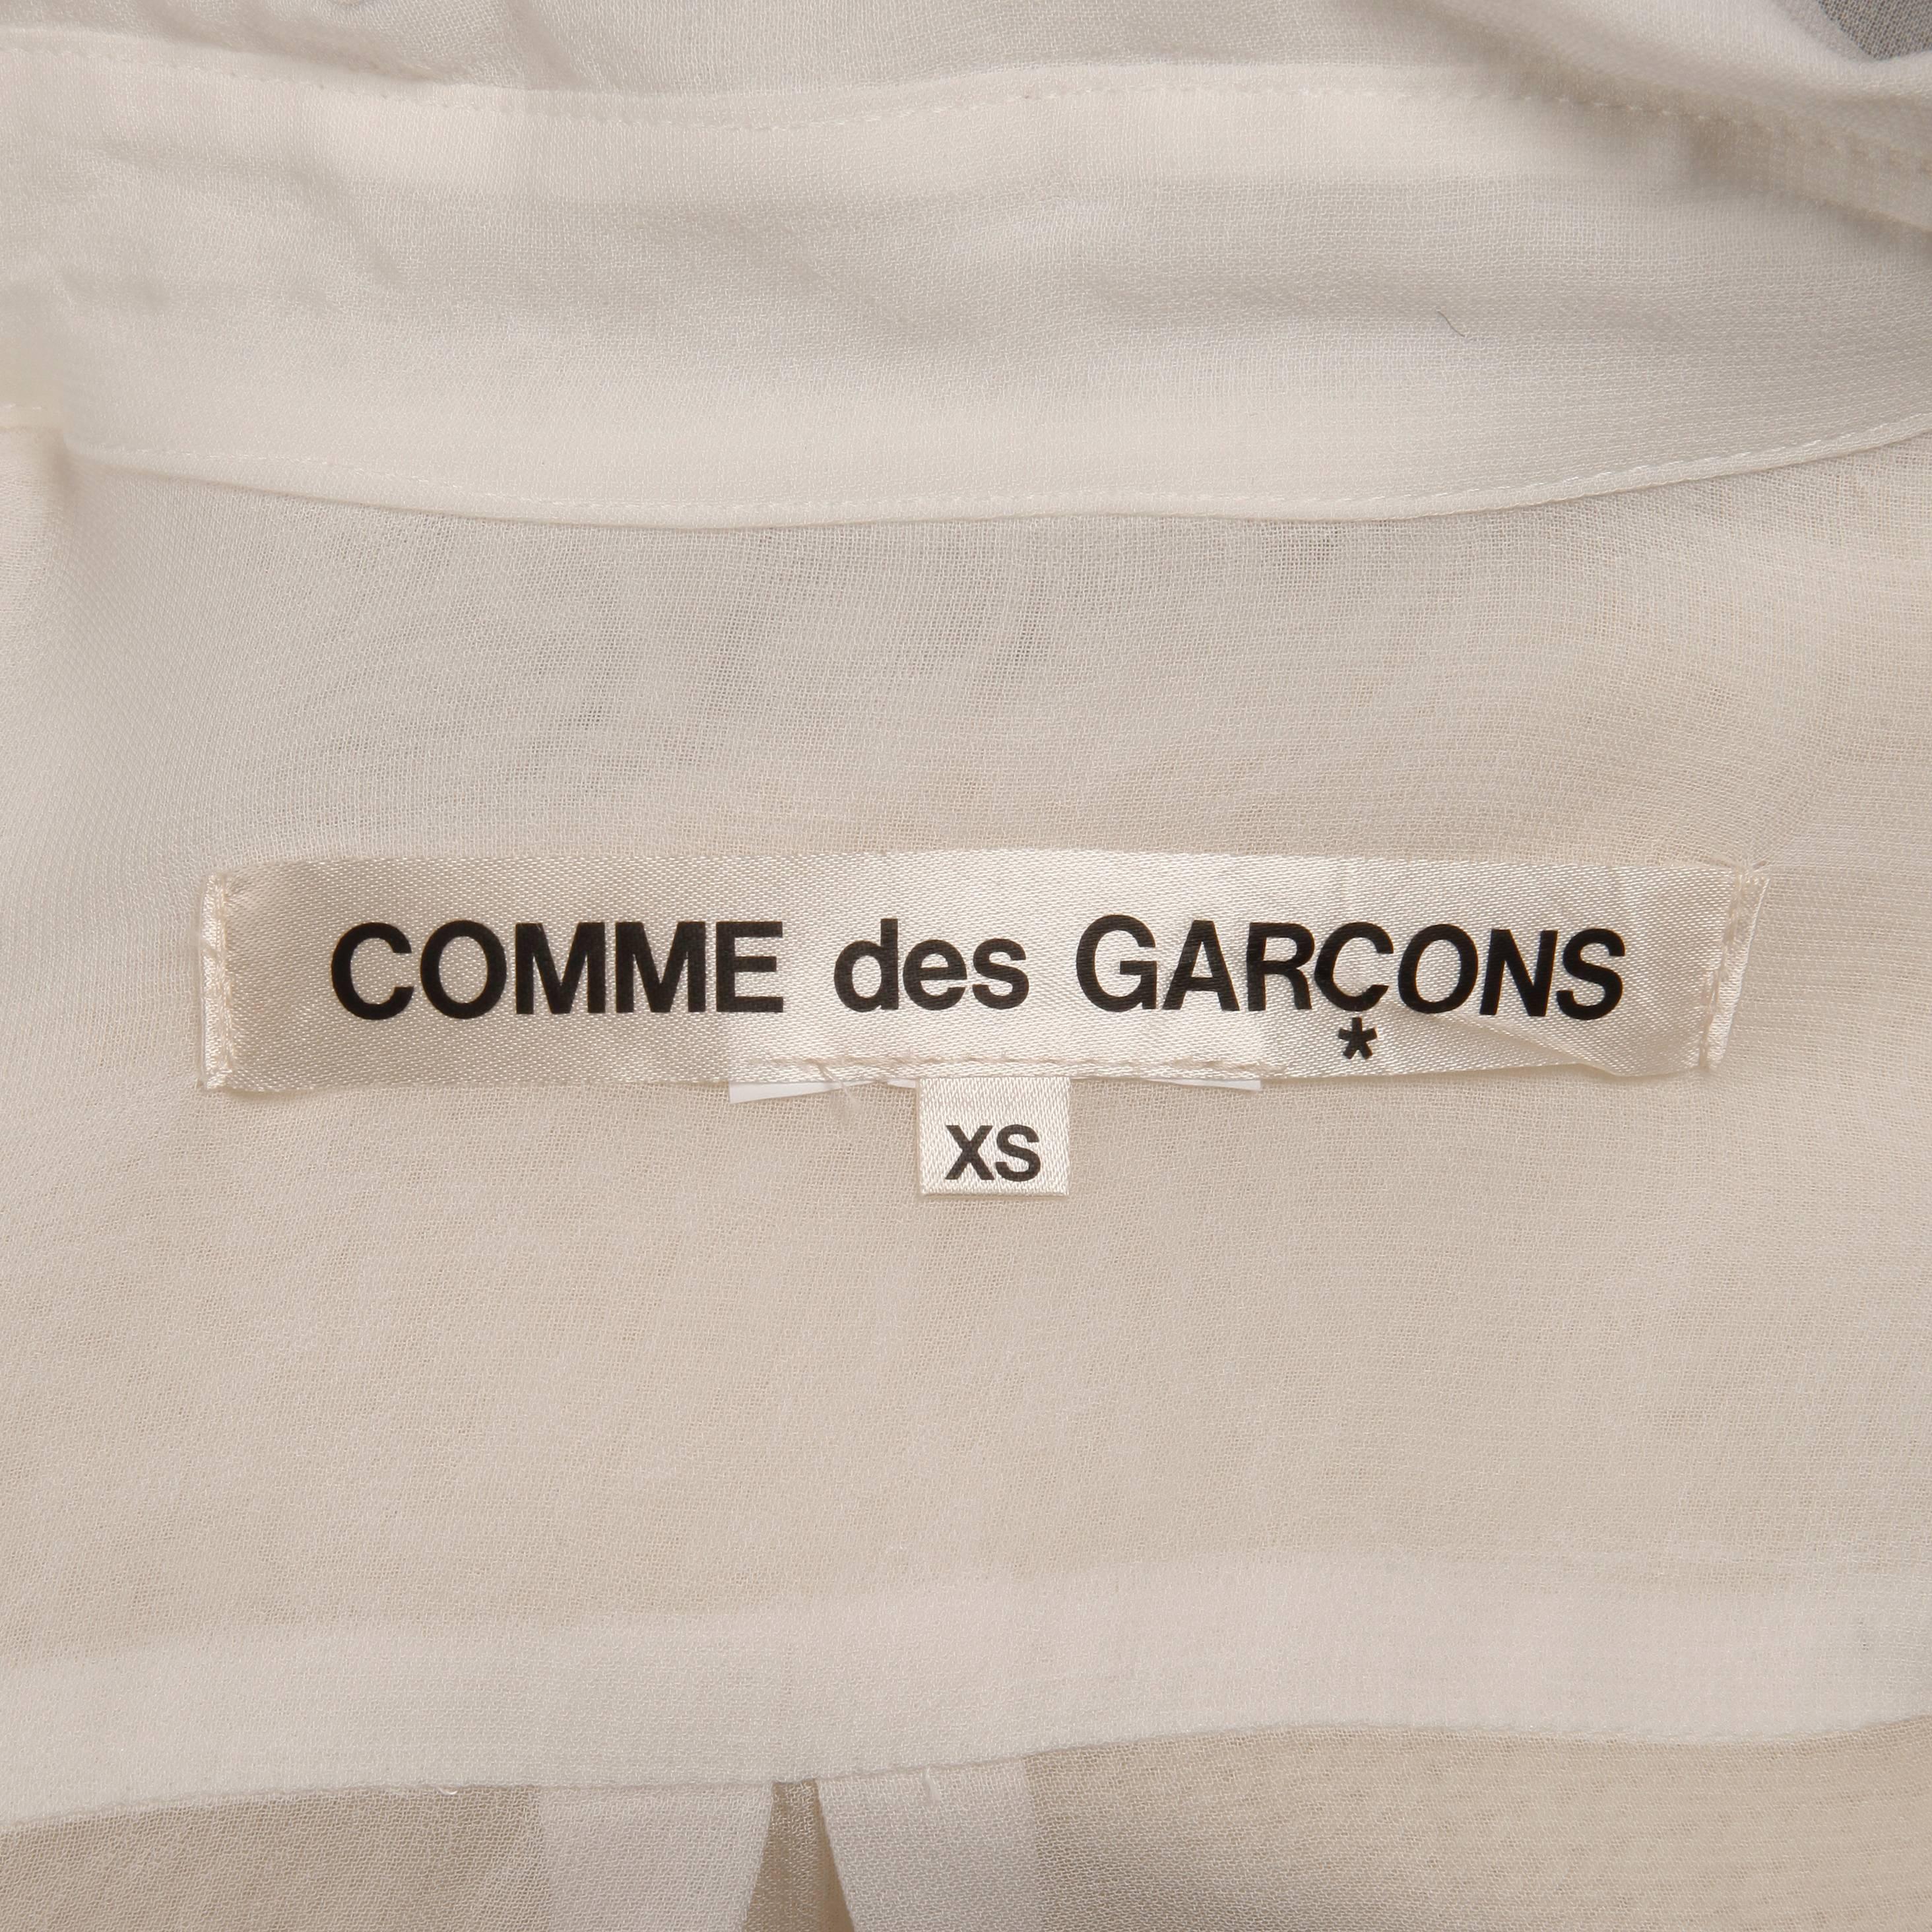 Comme des Garcons White Button Up Blouse Top/ Shirt with Cream Wool Knit Sleeves In Excellent Condition For Sale In Sparks, NV